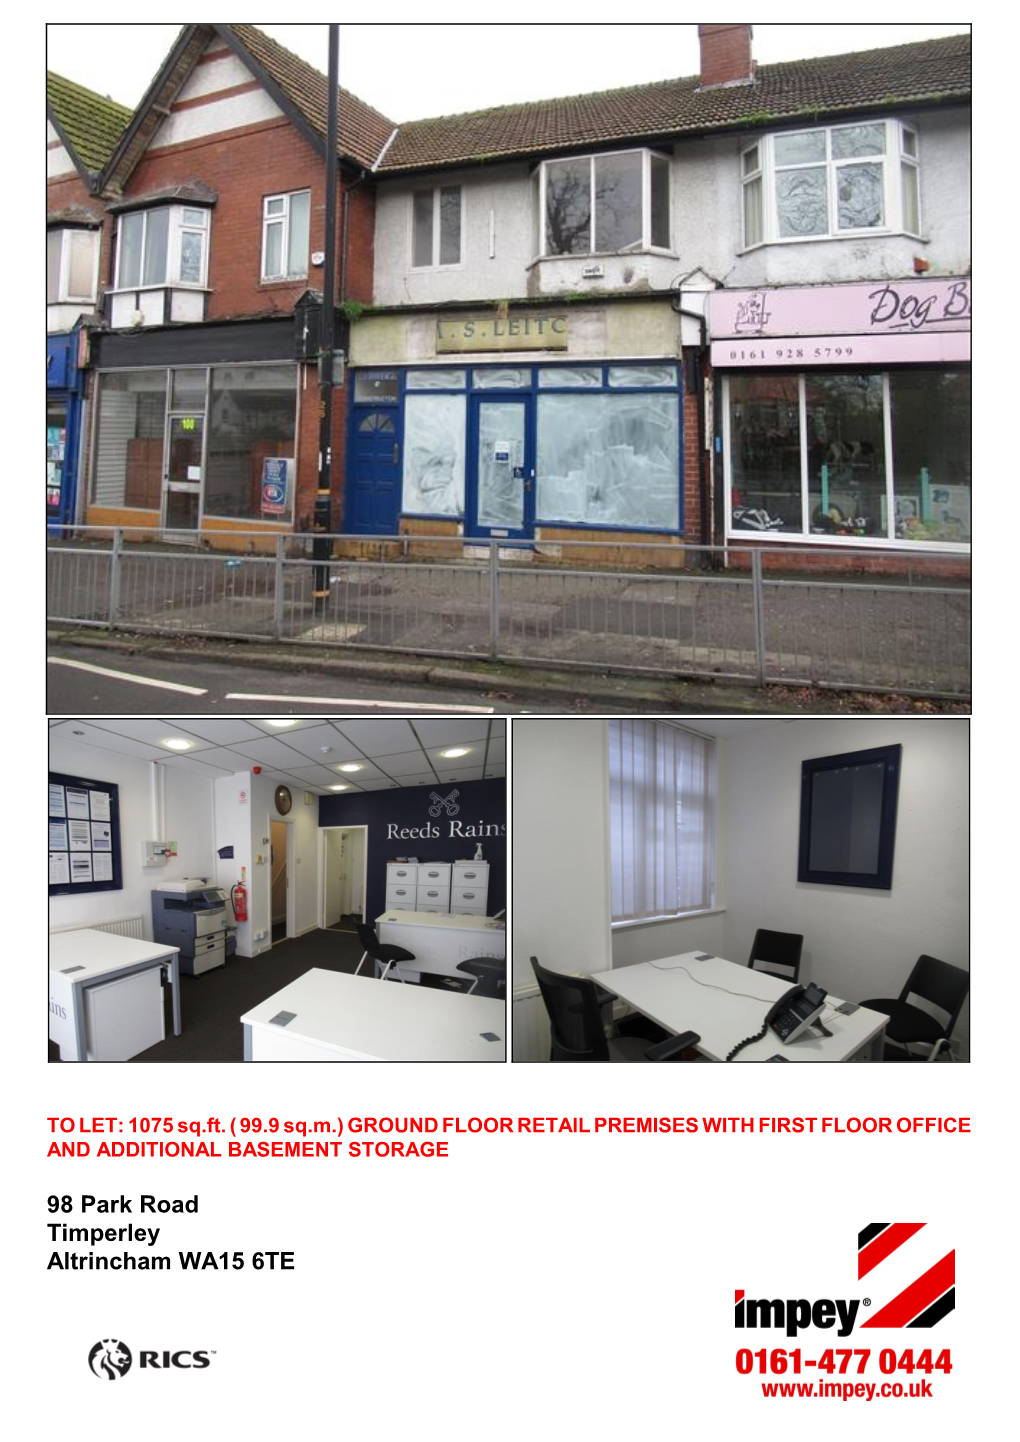 98 Park Road Timperley Altrincham WA15 6TE Location the Property Is Located on Park Road Occupying a Prominent Position, a Short Walk from the Centre of Timperley